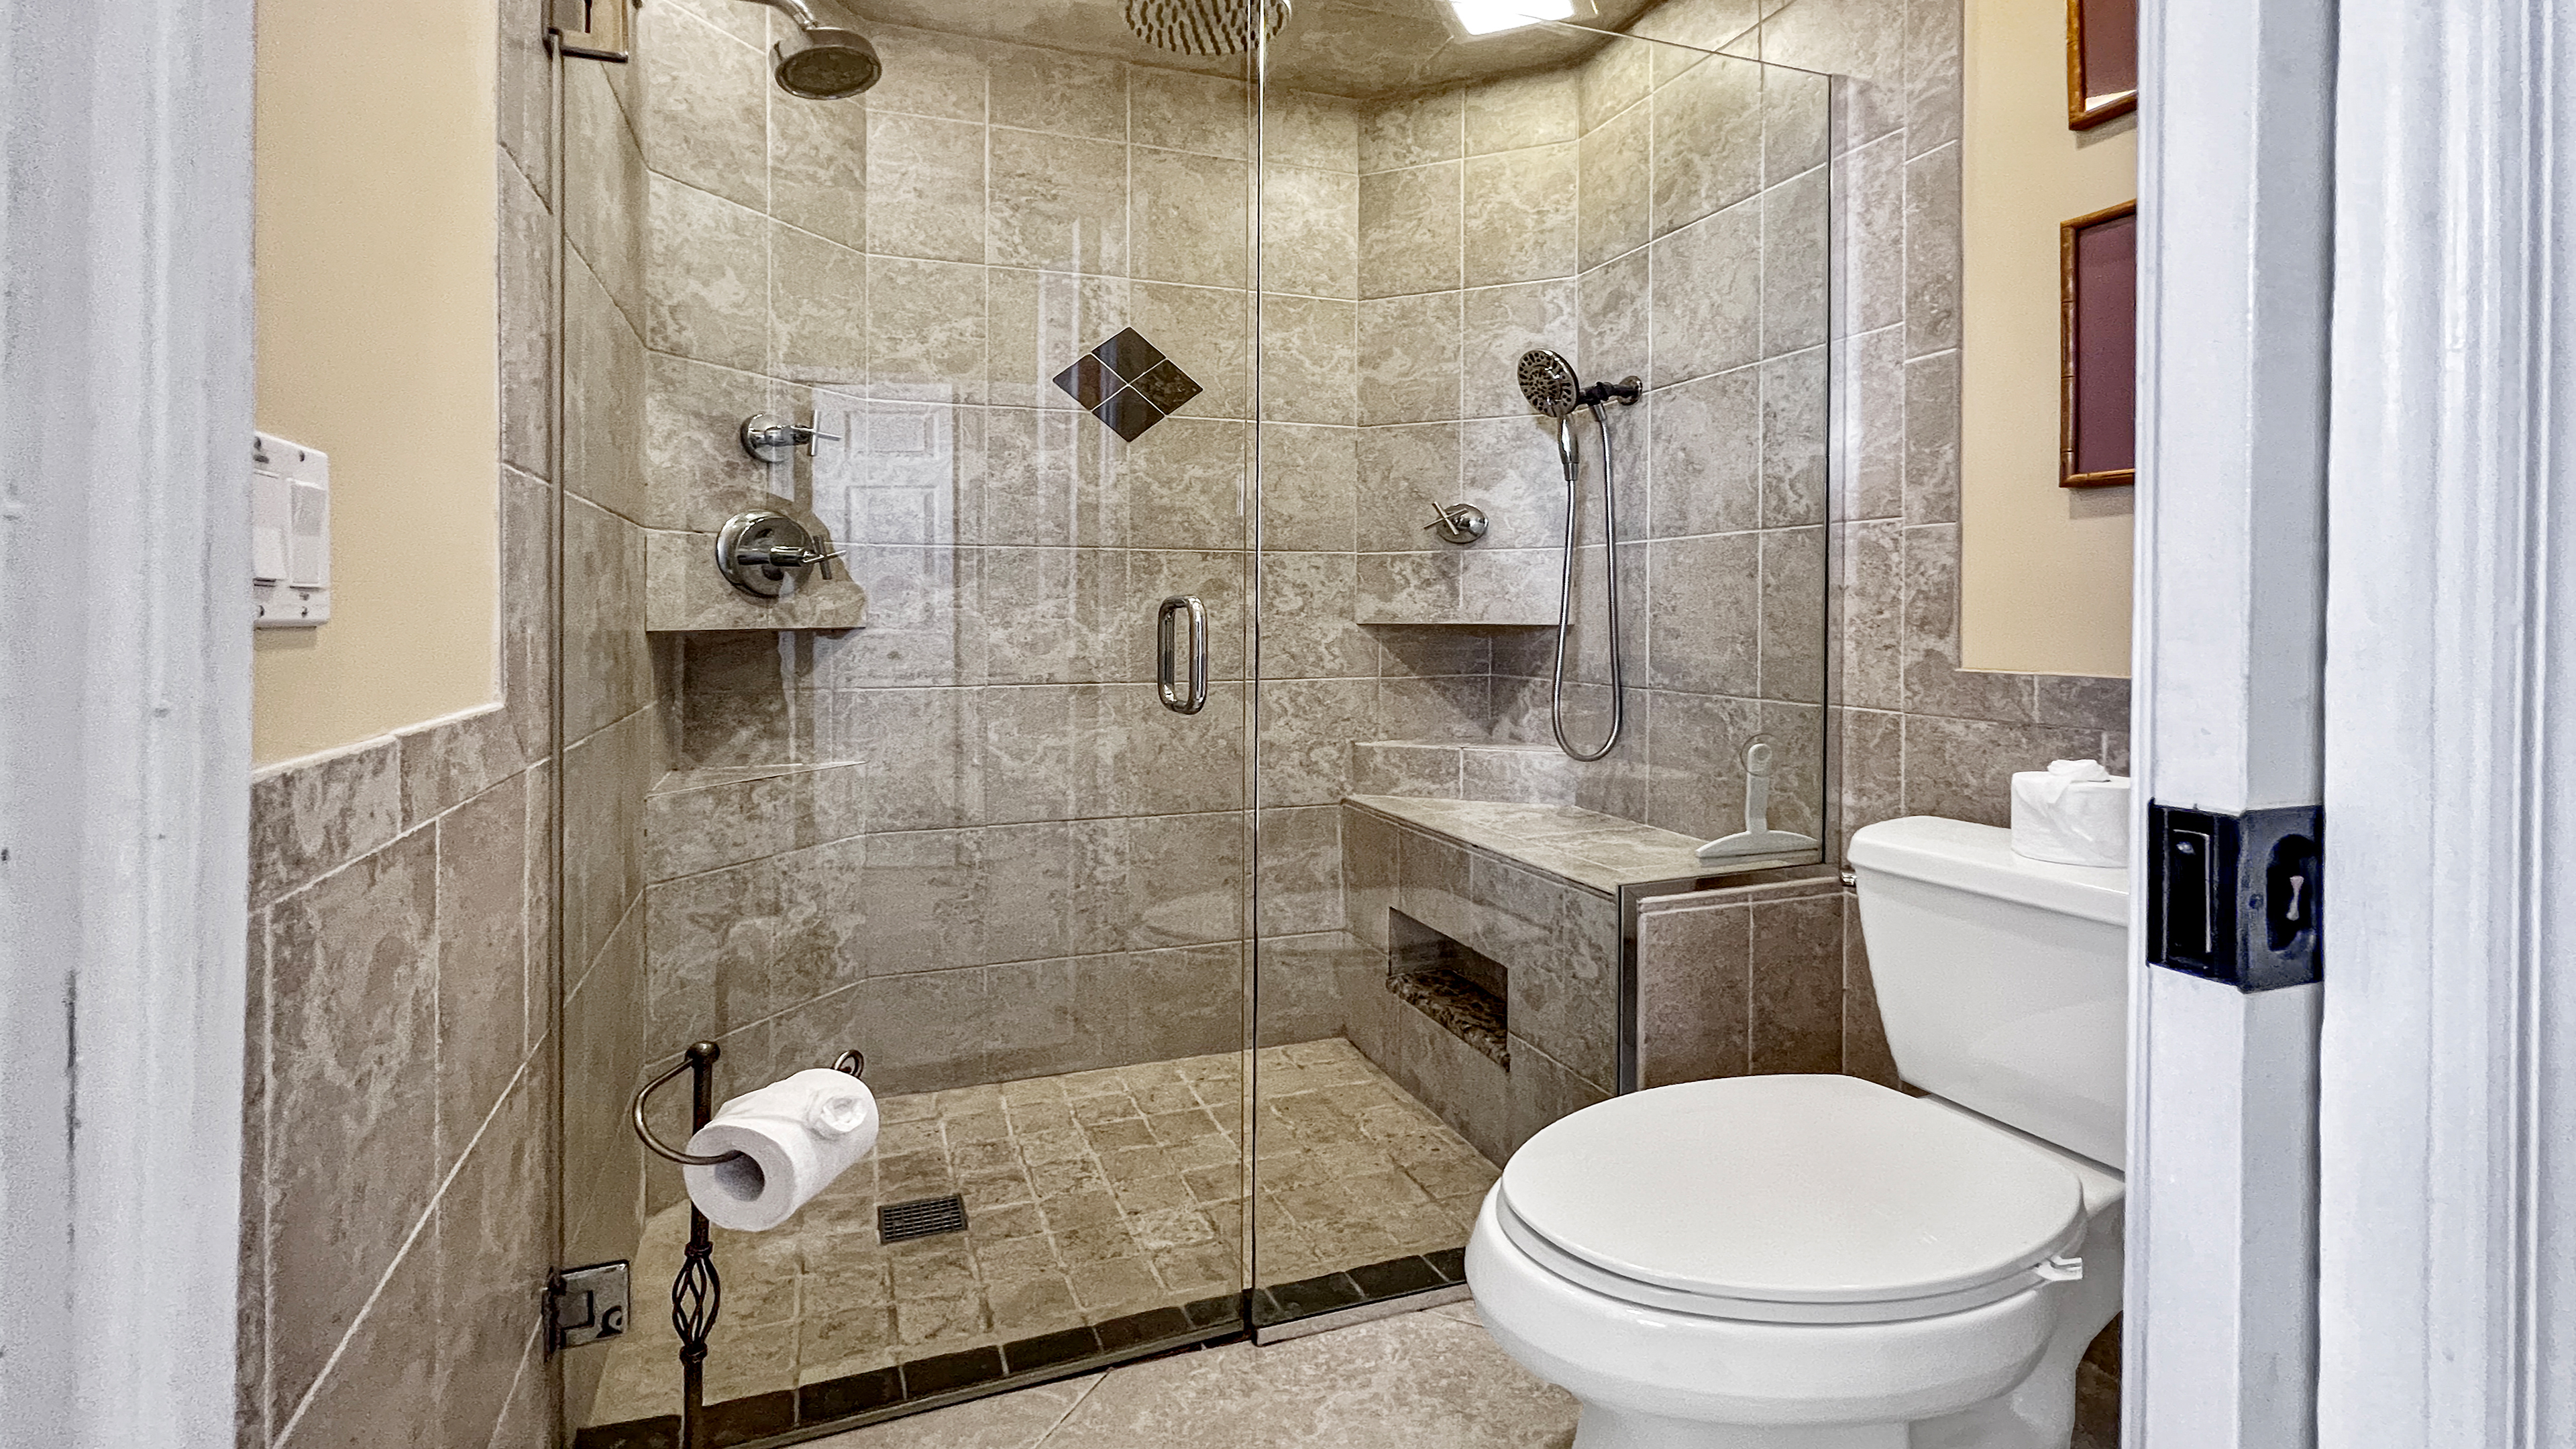 Separate toilet with walk-in shower